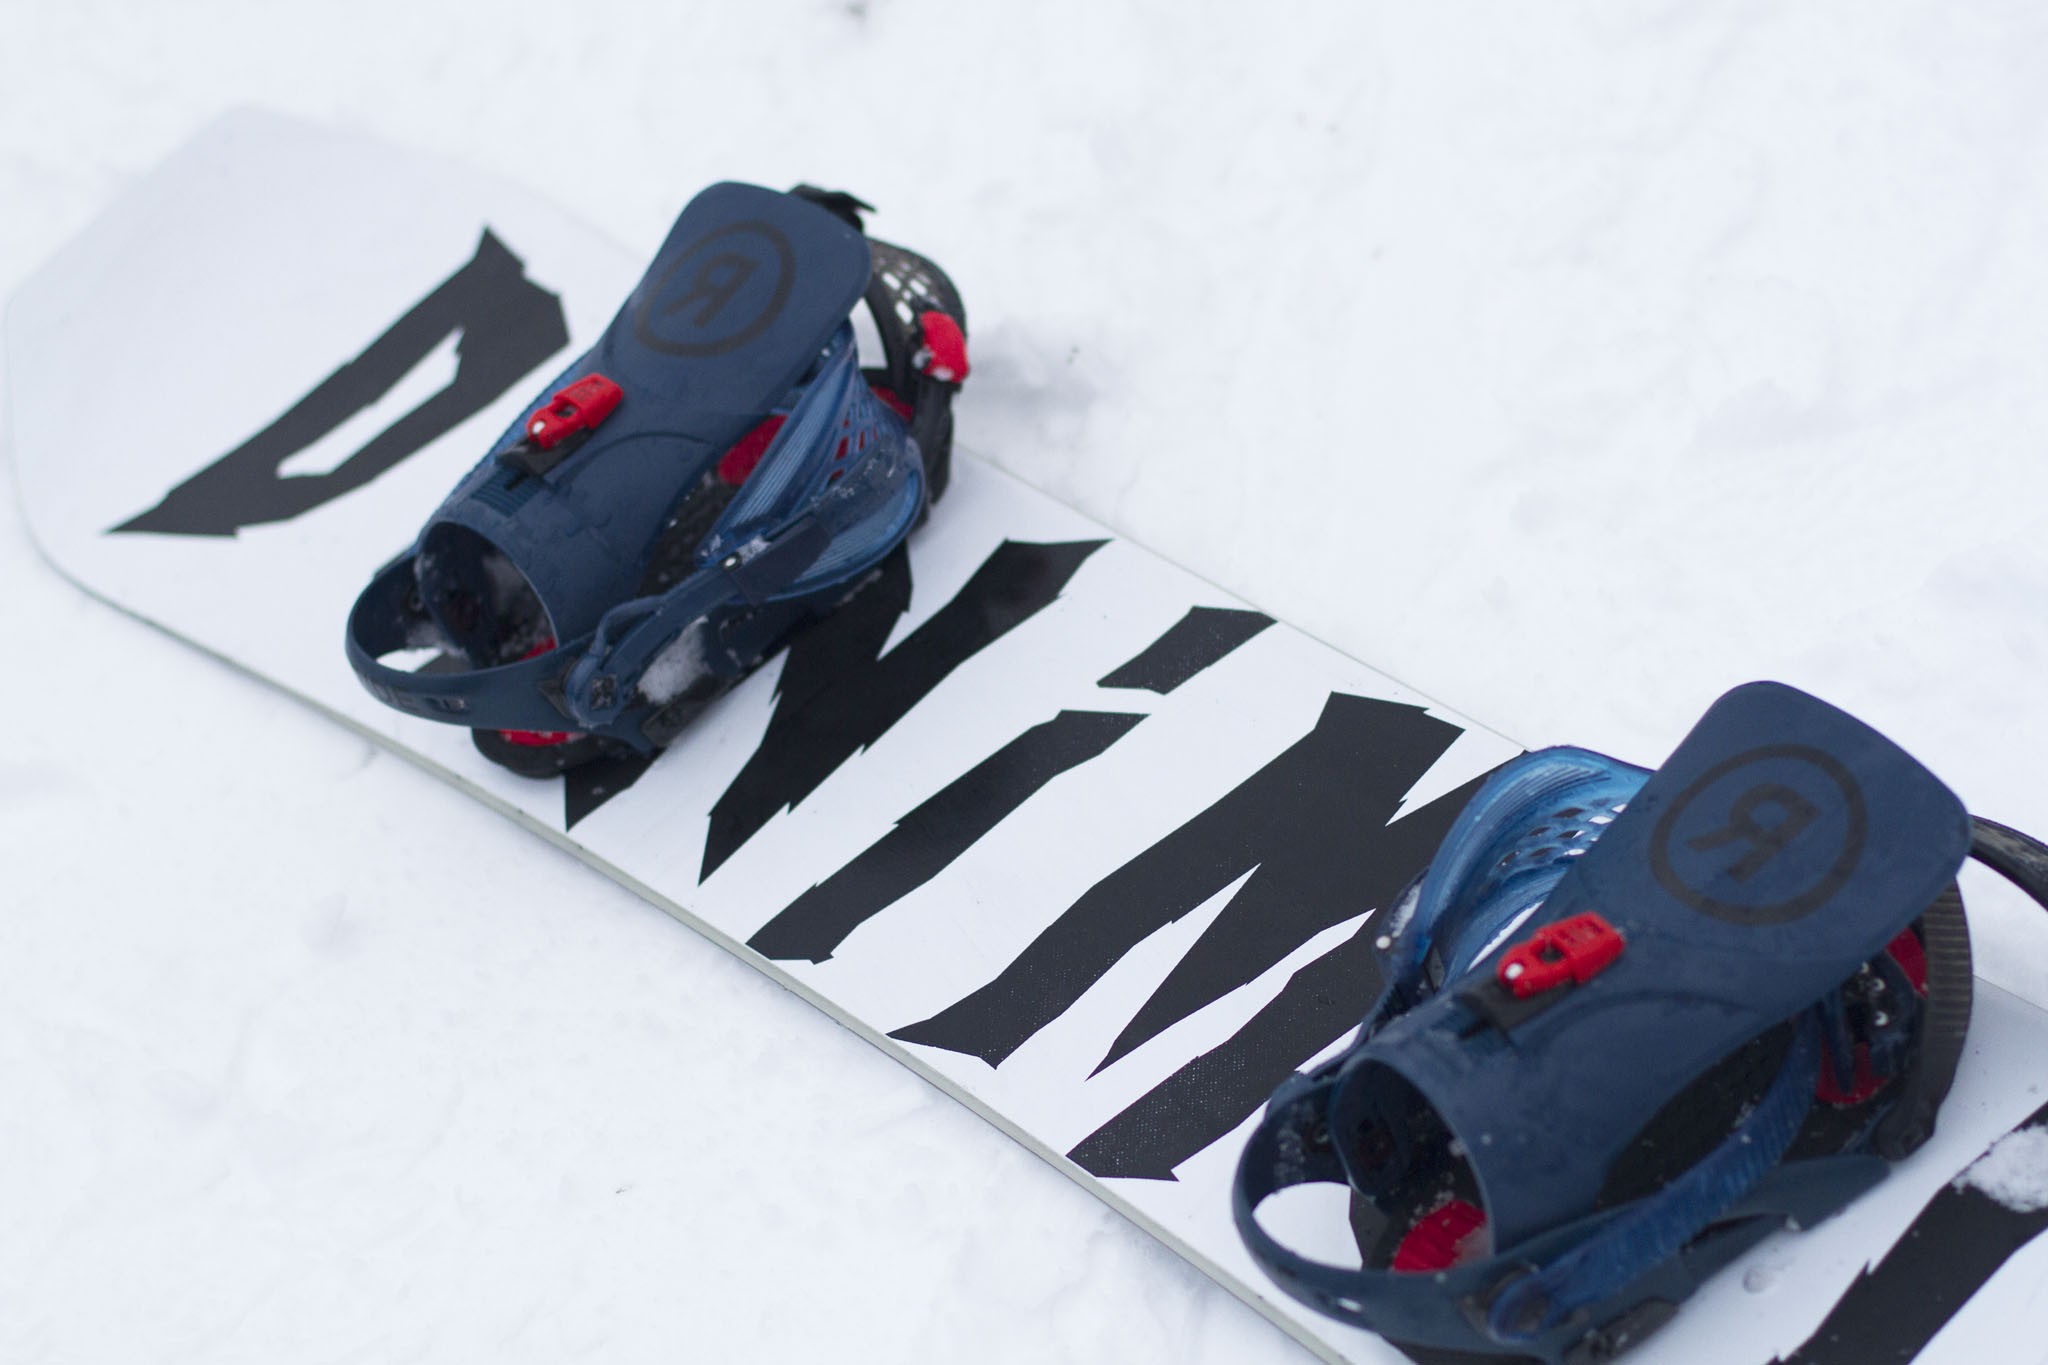 All-mountain chargin' and jibbin': The RIDE Snowboards Helix